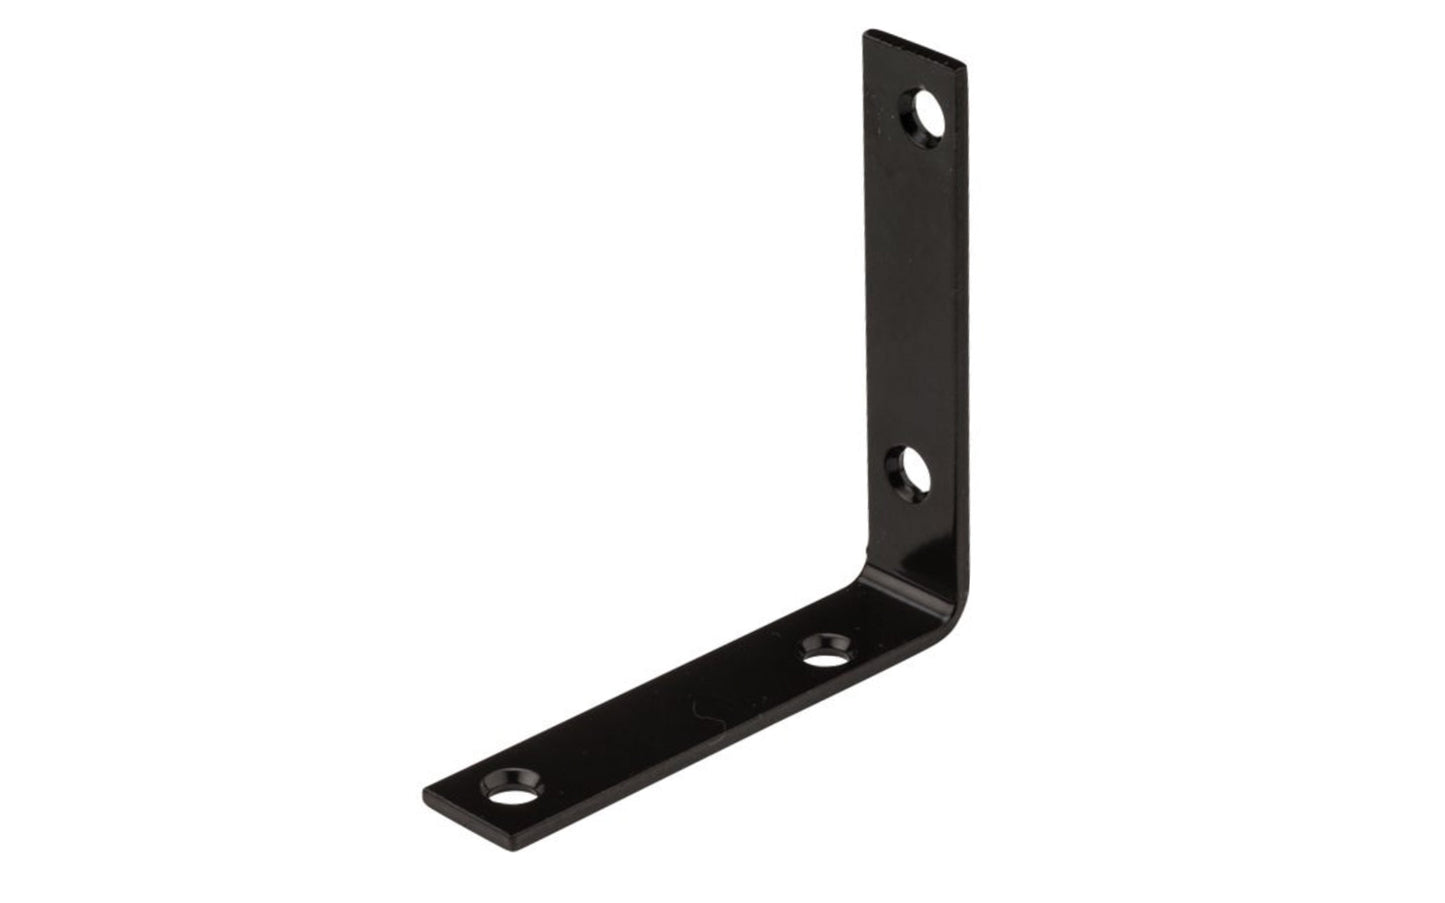 This 3-1/2" x 3/4" Black Finish Corner Brace is designed for furniture, countertops, shelving support, chests, cabinets, etc. For use in home, workshop, & industrial applications. Made of steel material with a black finish. Sold as a single corner iron. Screws not included. National Hardware Model No. N226-484.